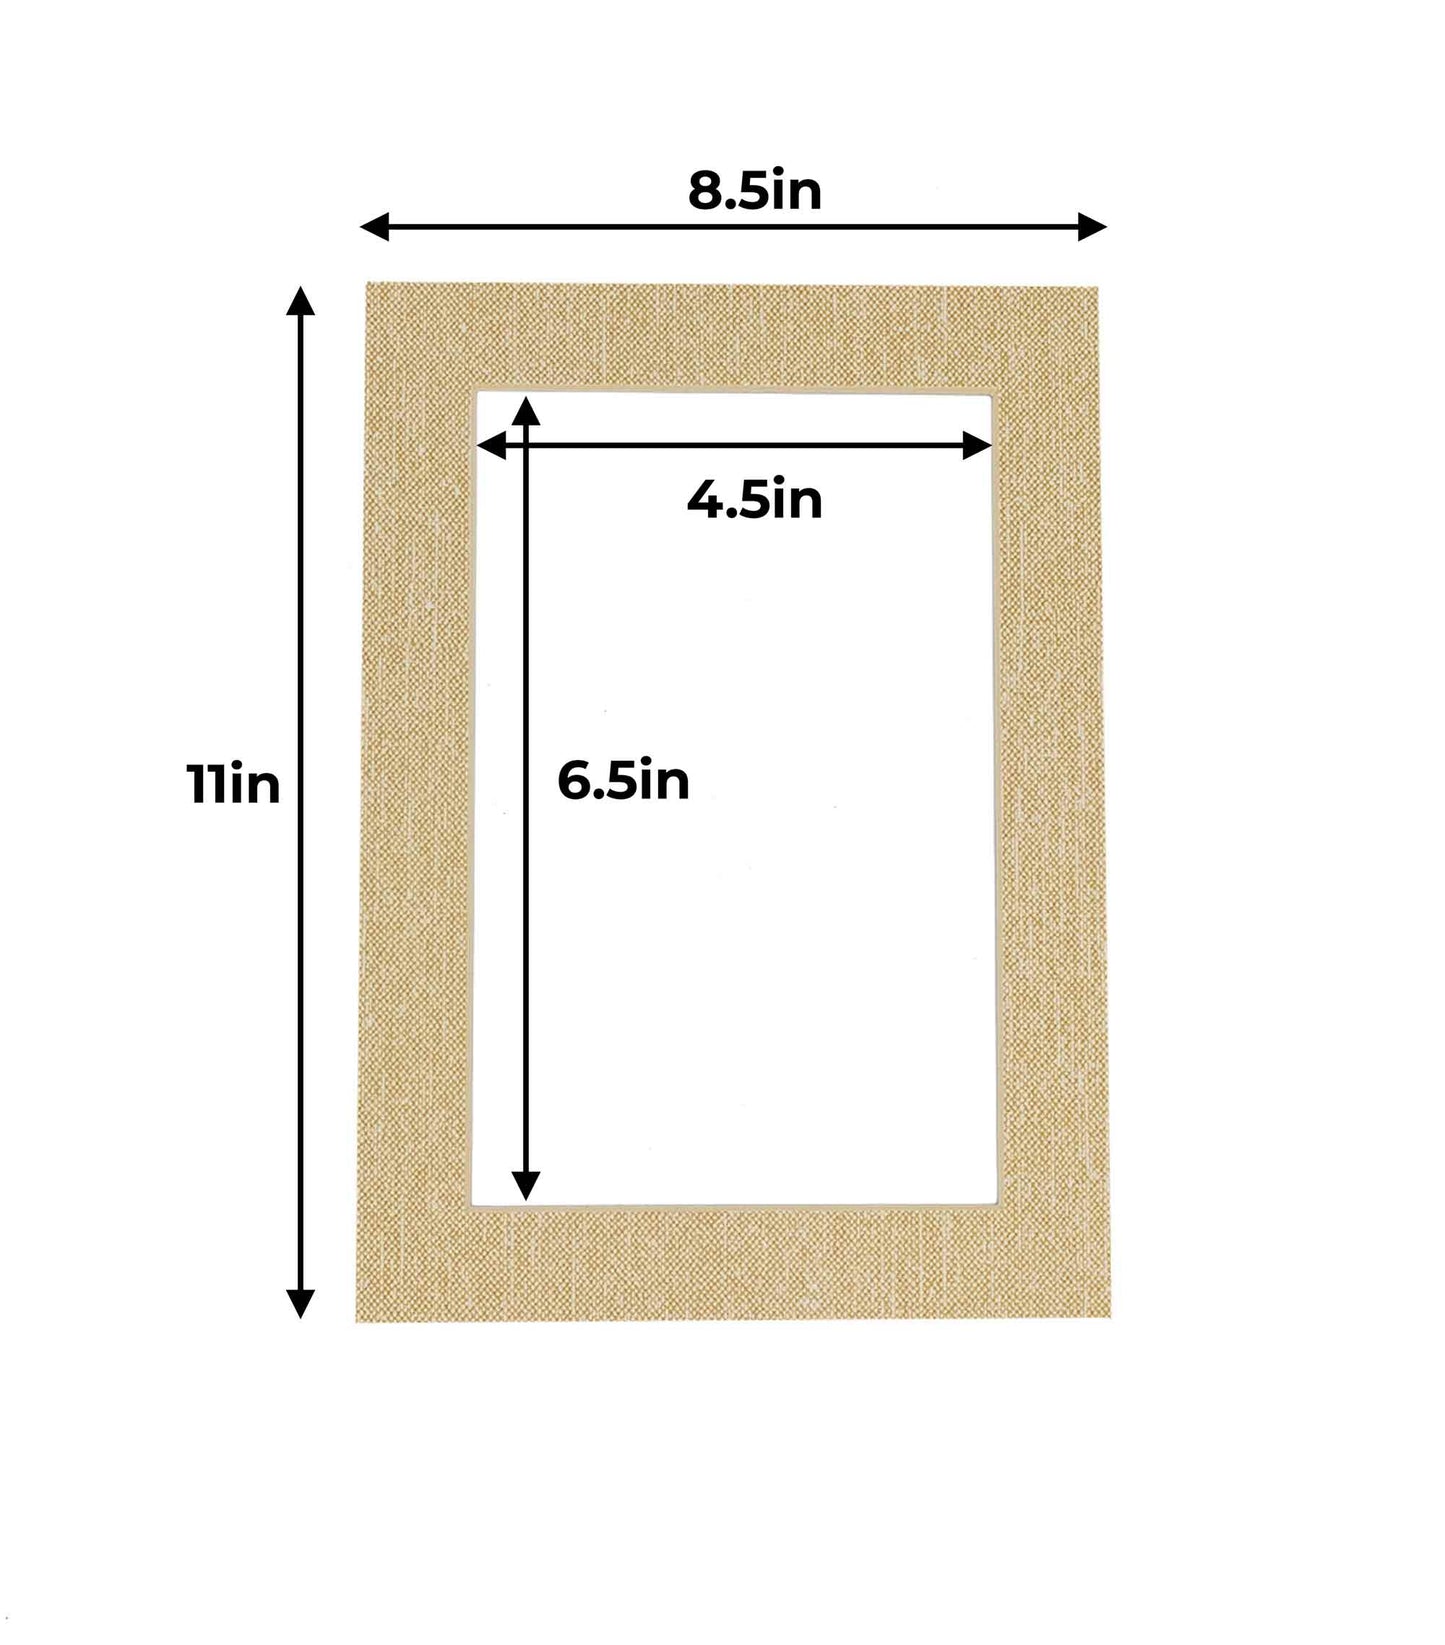 Pack of 25 Fresh Linen Canvas Precut Acid-Free Matboard Set with Clear Bags & Backings